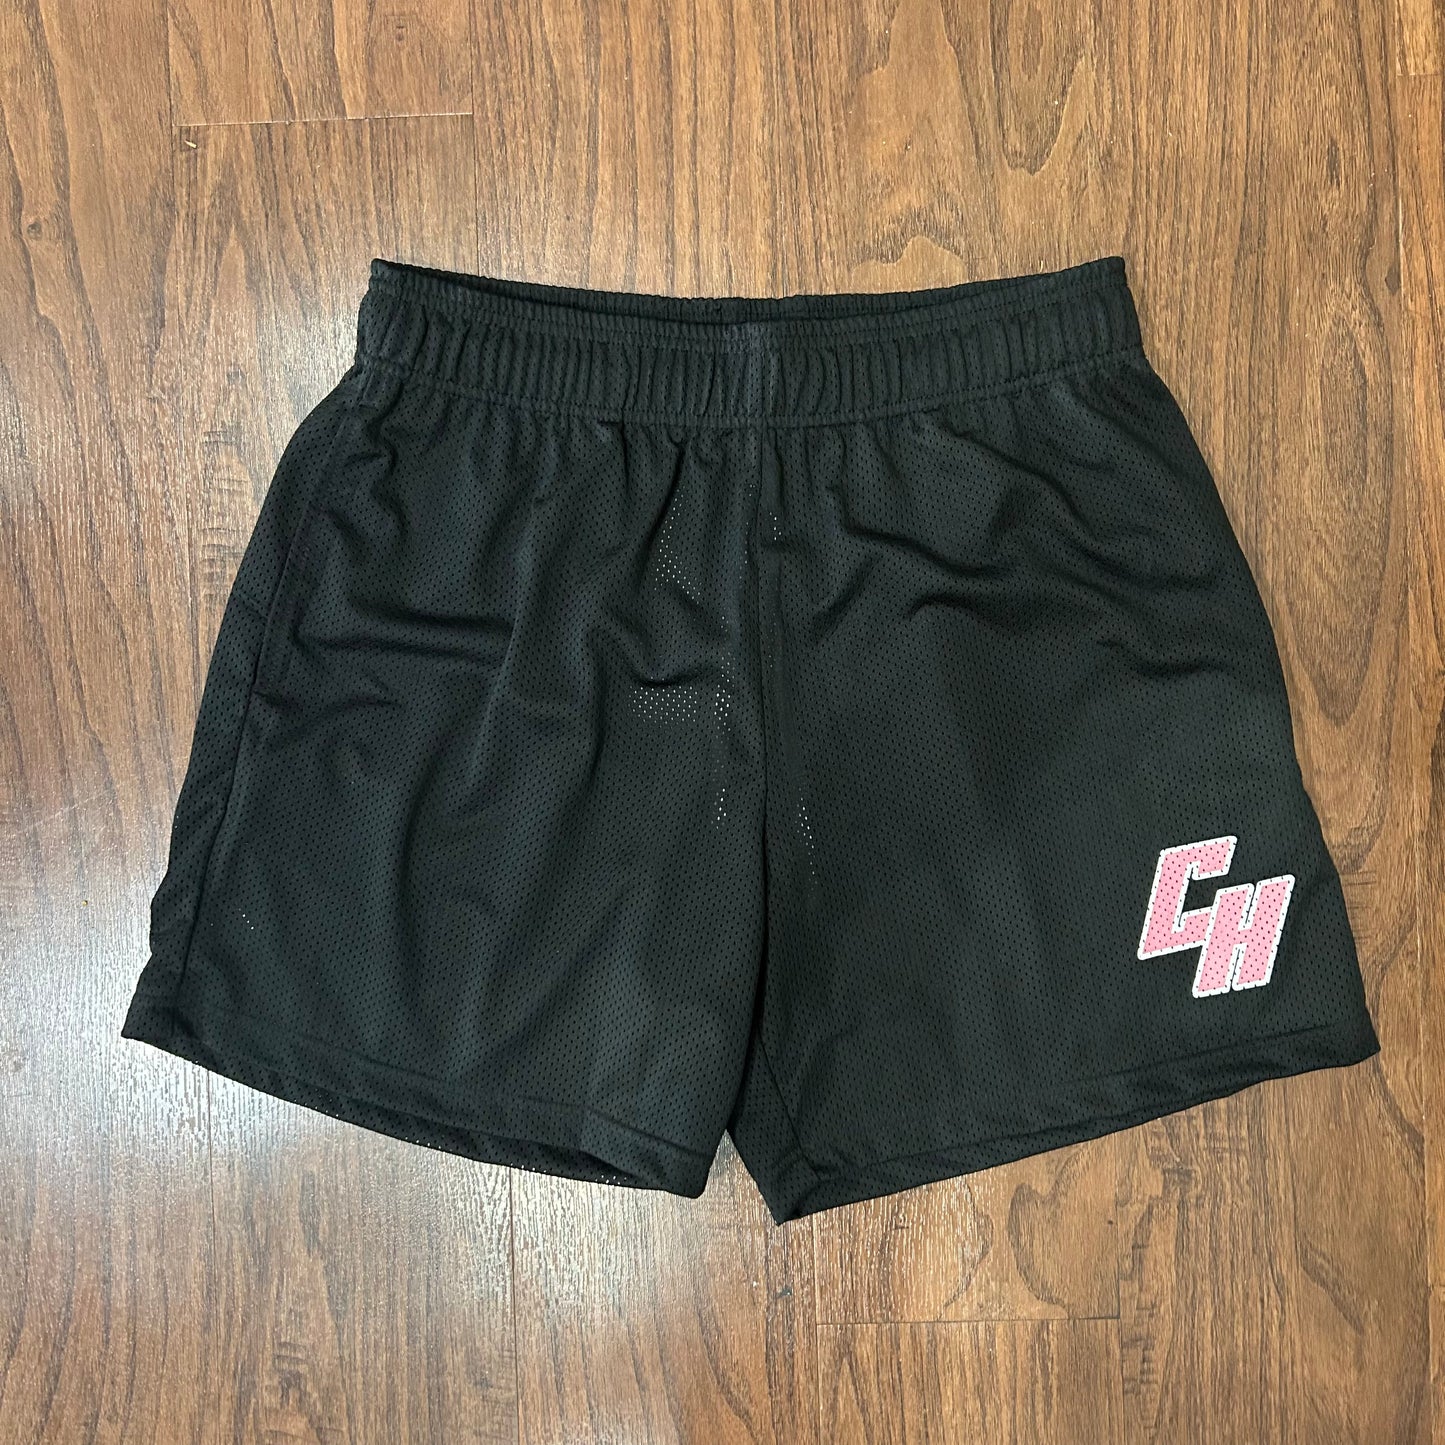 Common Hype Breast Cancer Logo Shorts